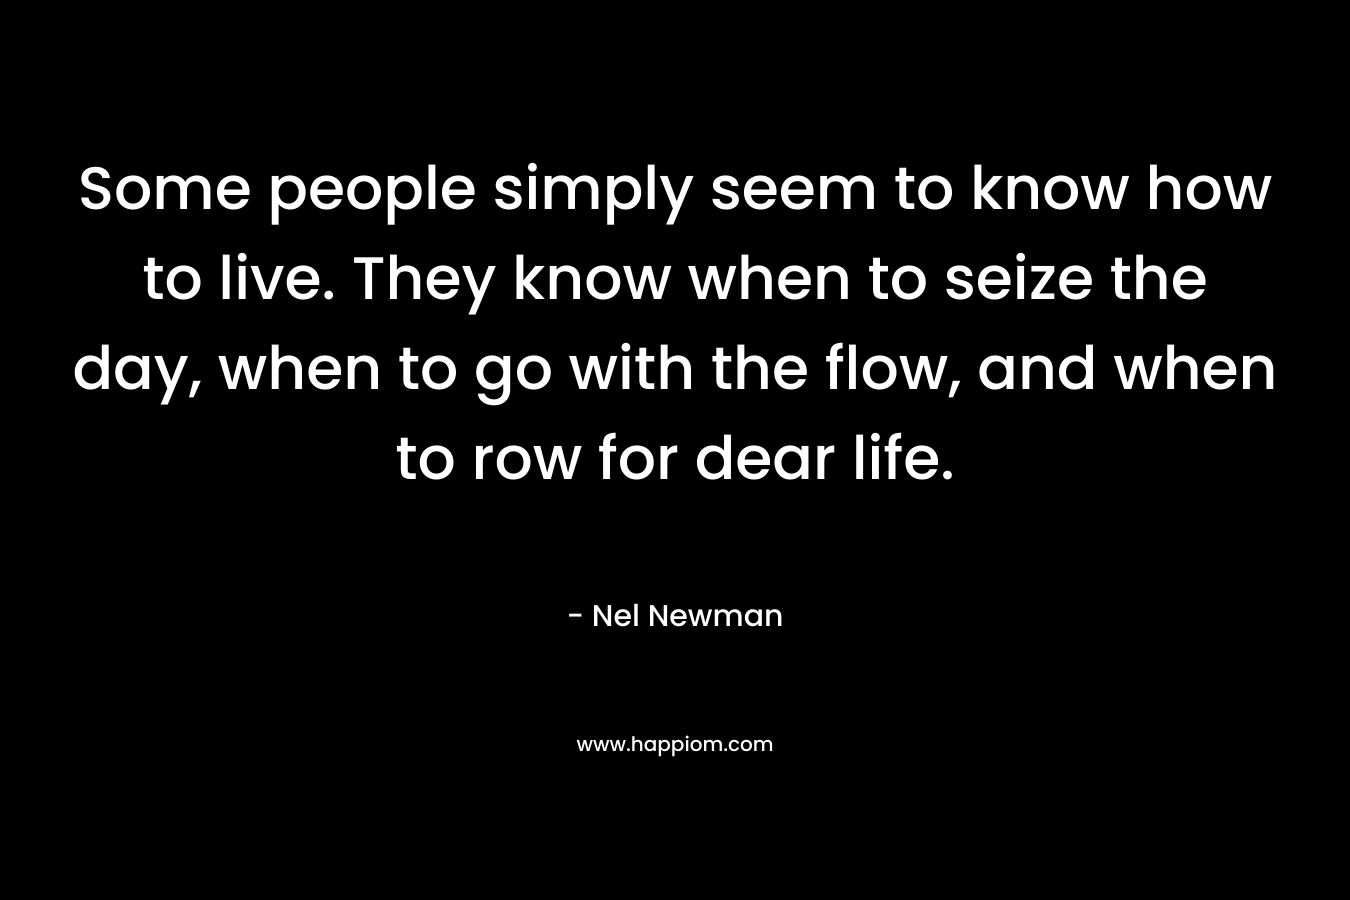 Some people simply seem to know how to live. They know when to seize the day, when to go with the flow, and when to row for dear life.